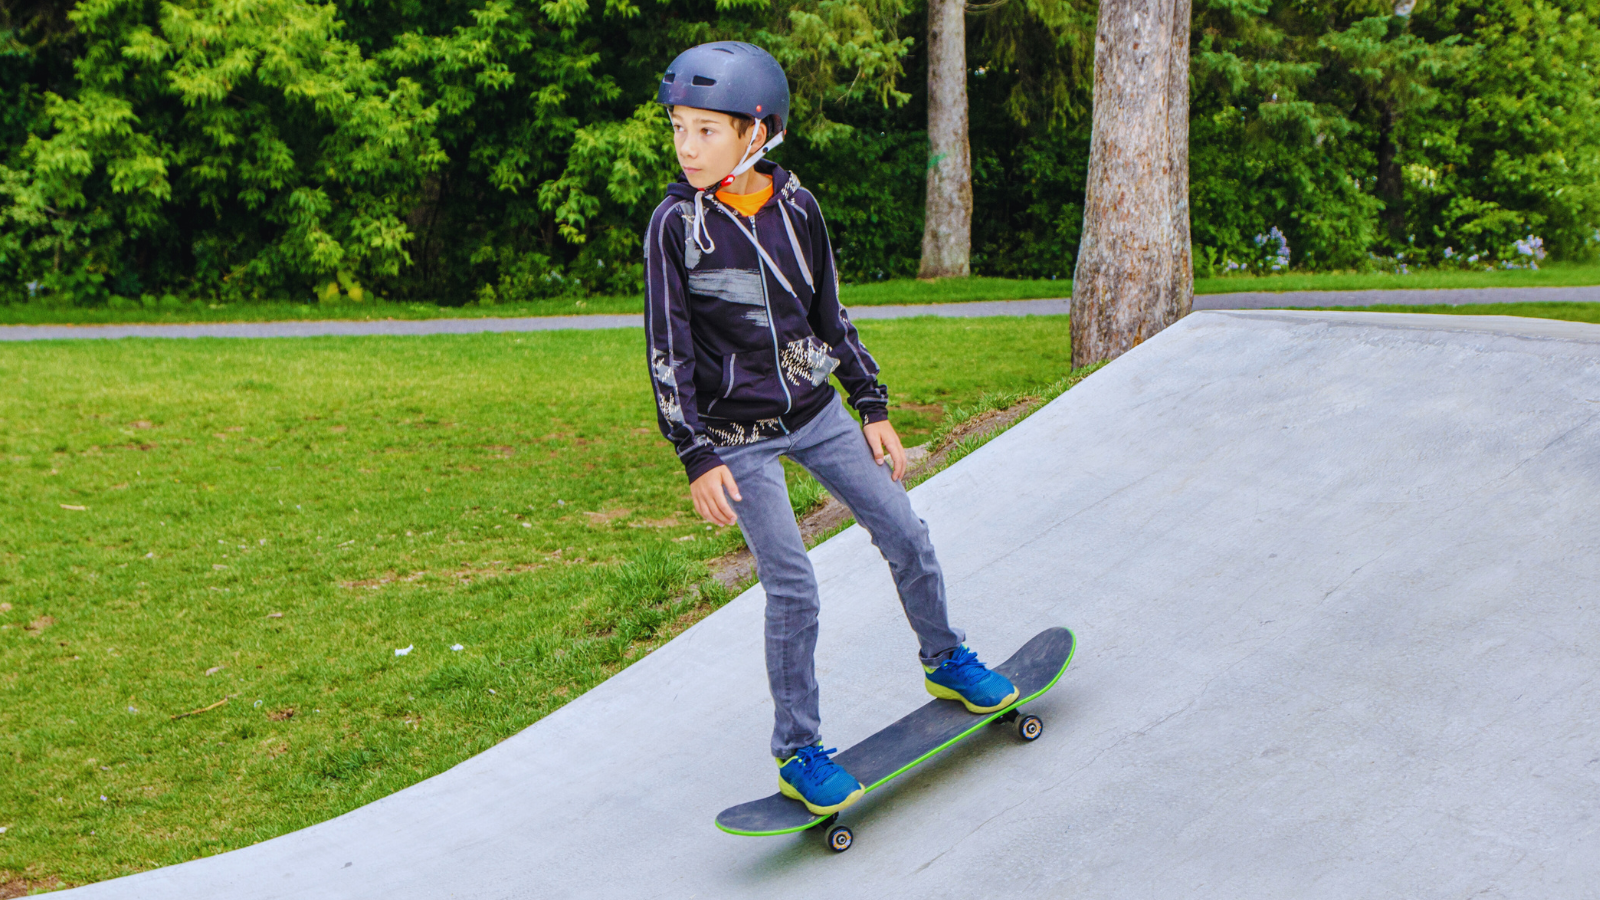 A photo of a child on a skateboard riding down a ramp